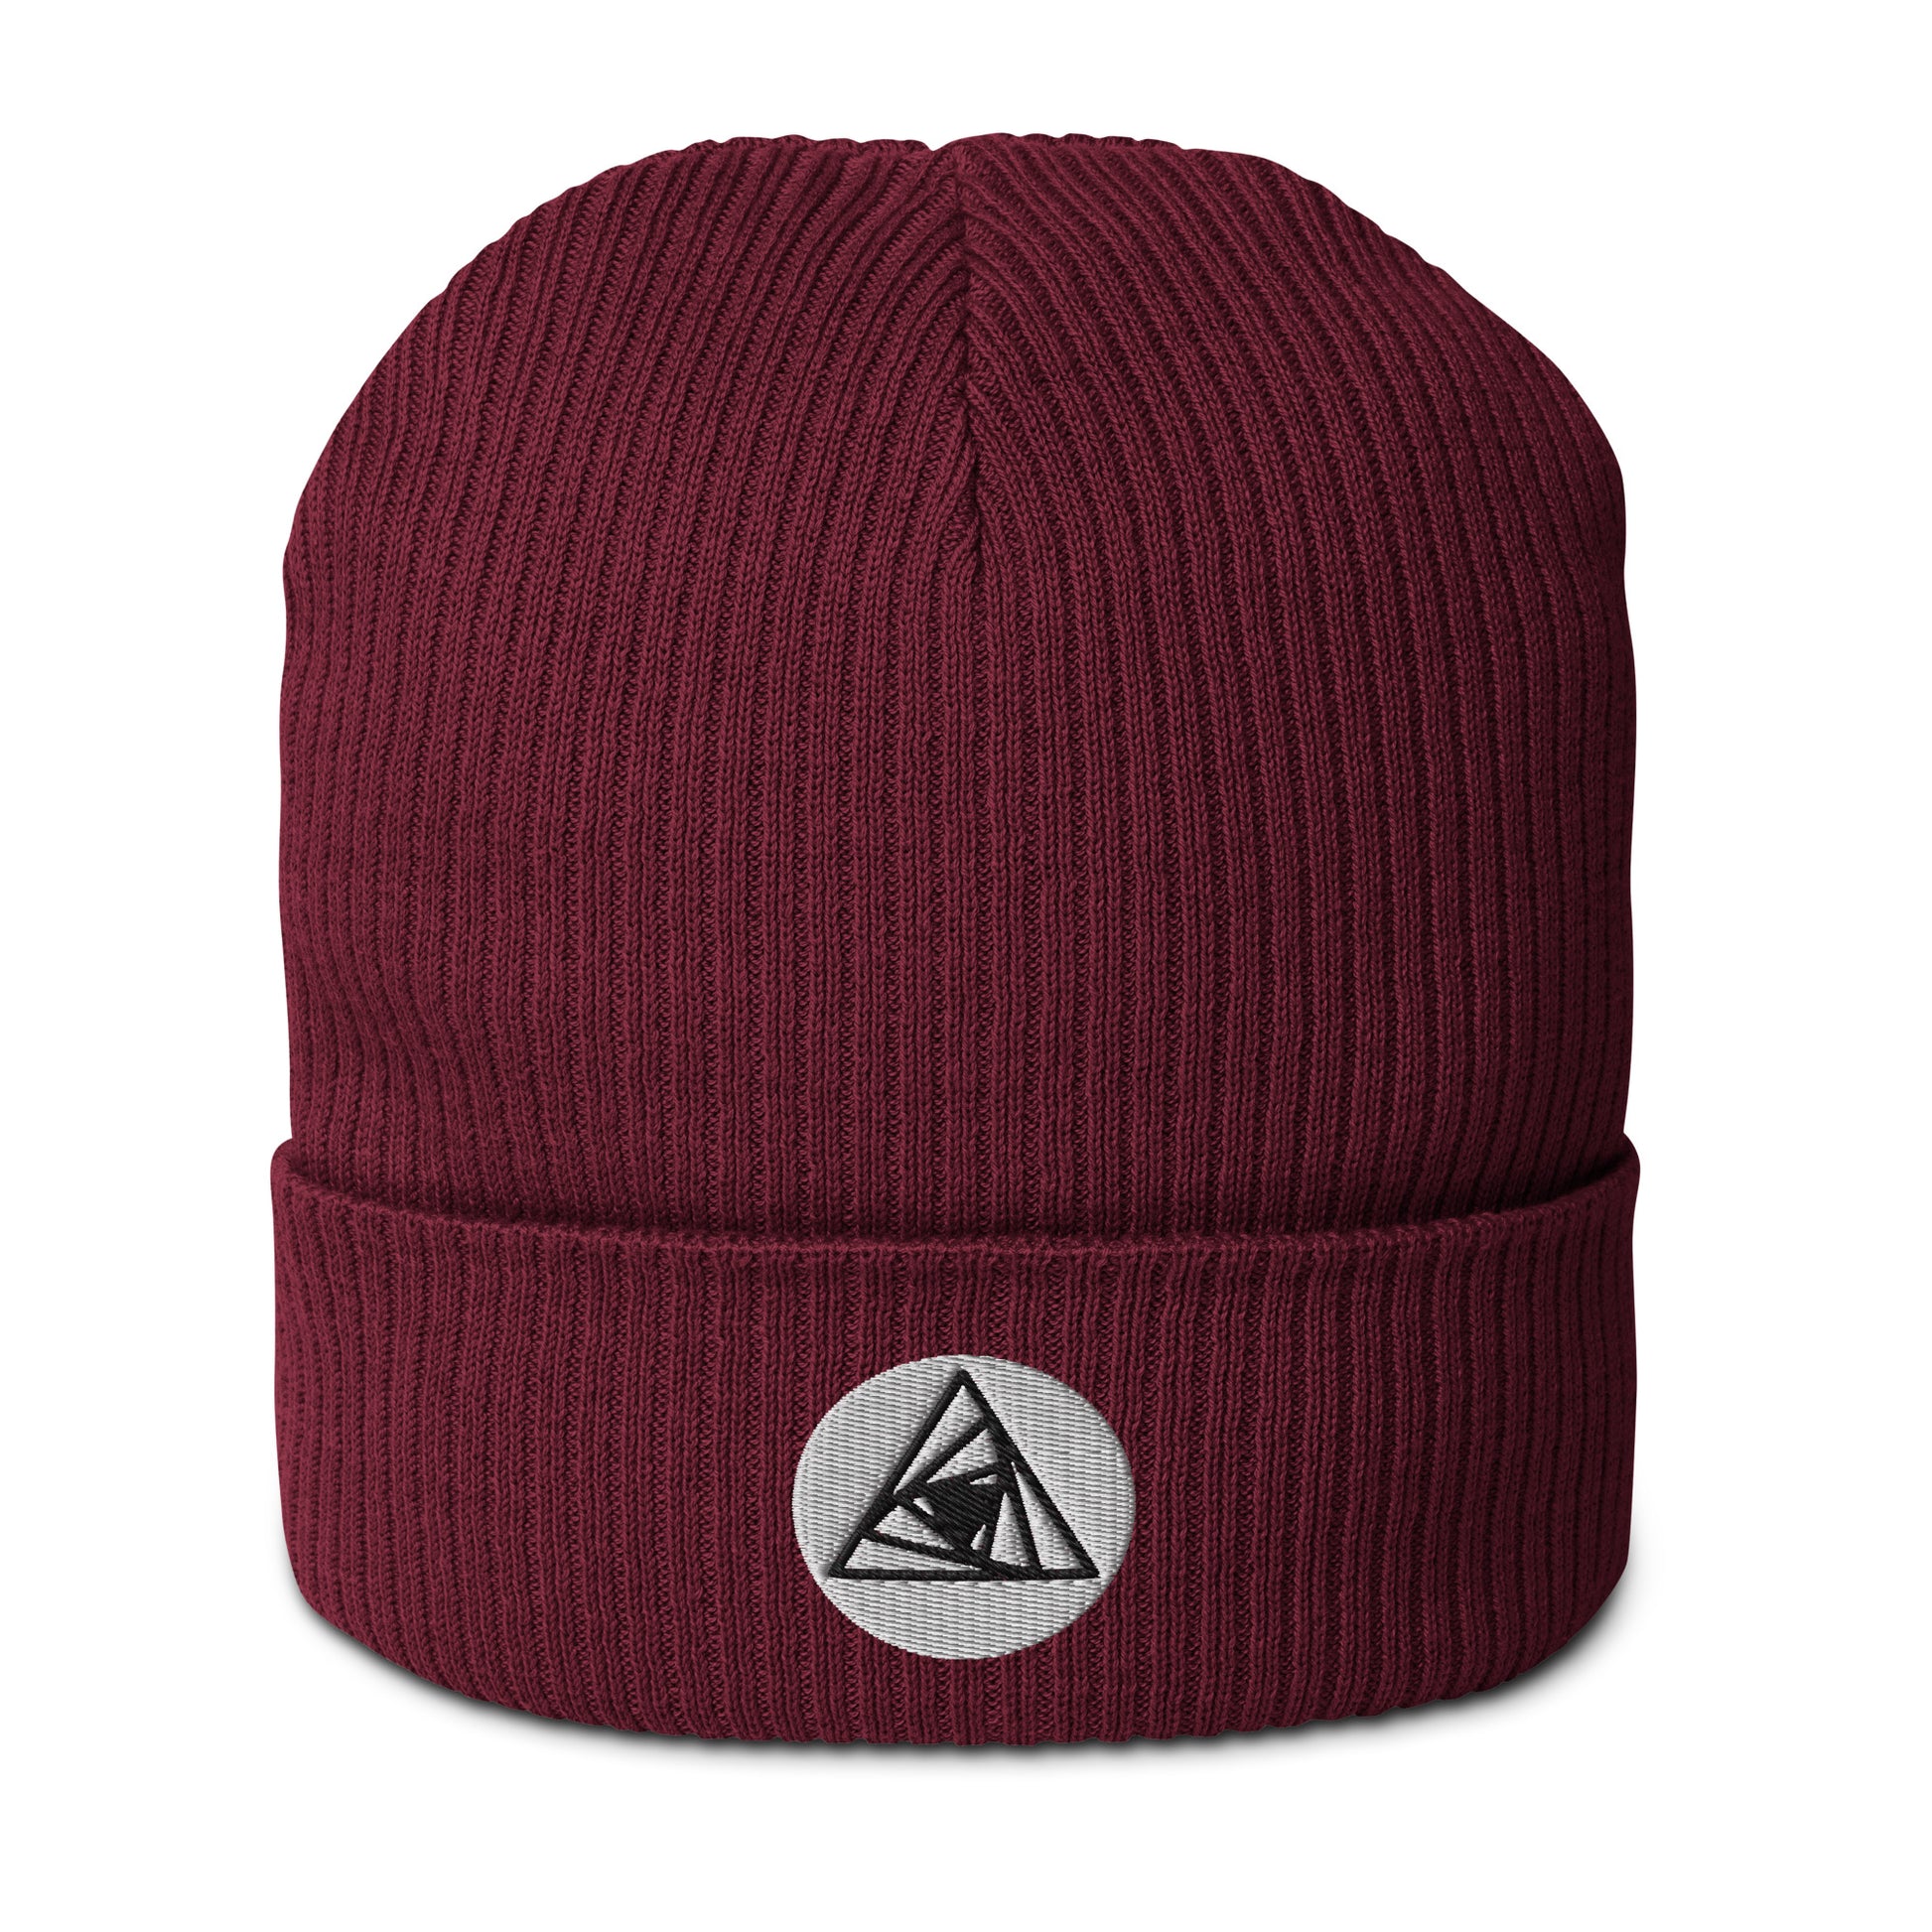 Behold, our Spiraling Equilateral Triangles Beanie in Wine Red —a garment of cosmic significance. Crafted from organic cotton and adorned with a mesmerizing Spiraling Equilateral Triangles embroidery, it's not your run-of-the-mill hat. 